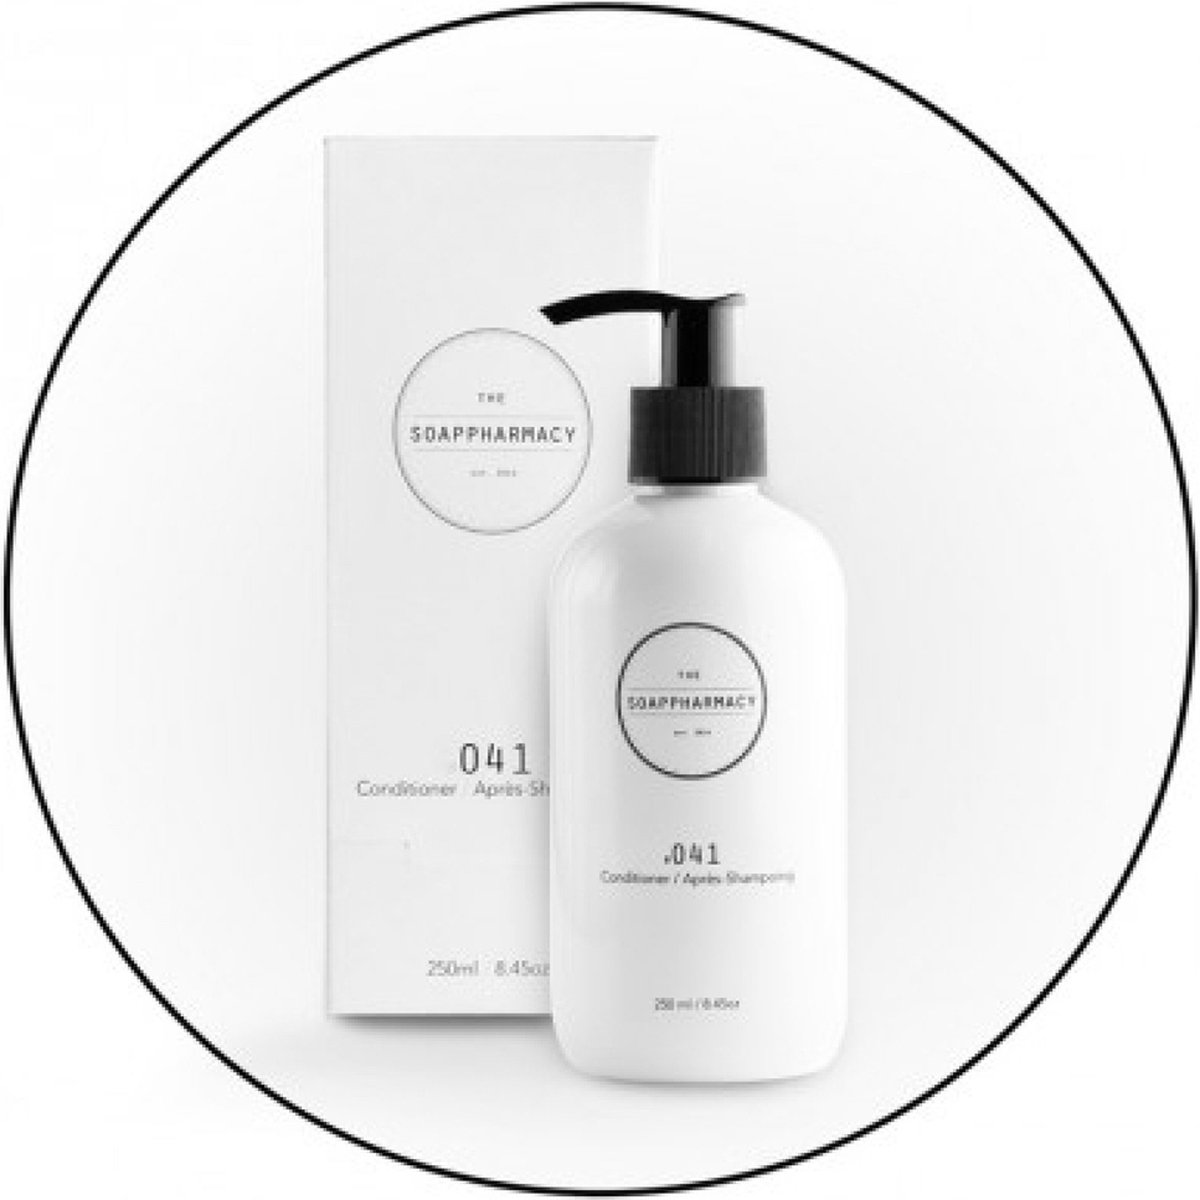 The Soappharmacy #041 Conditioner